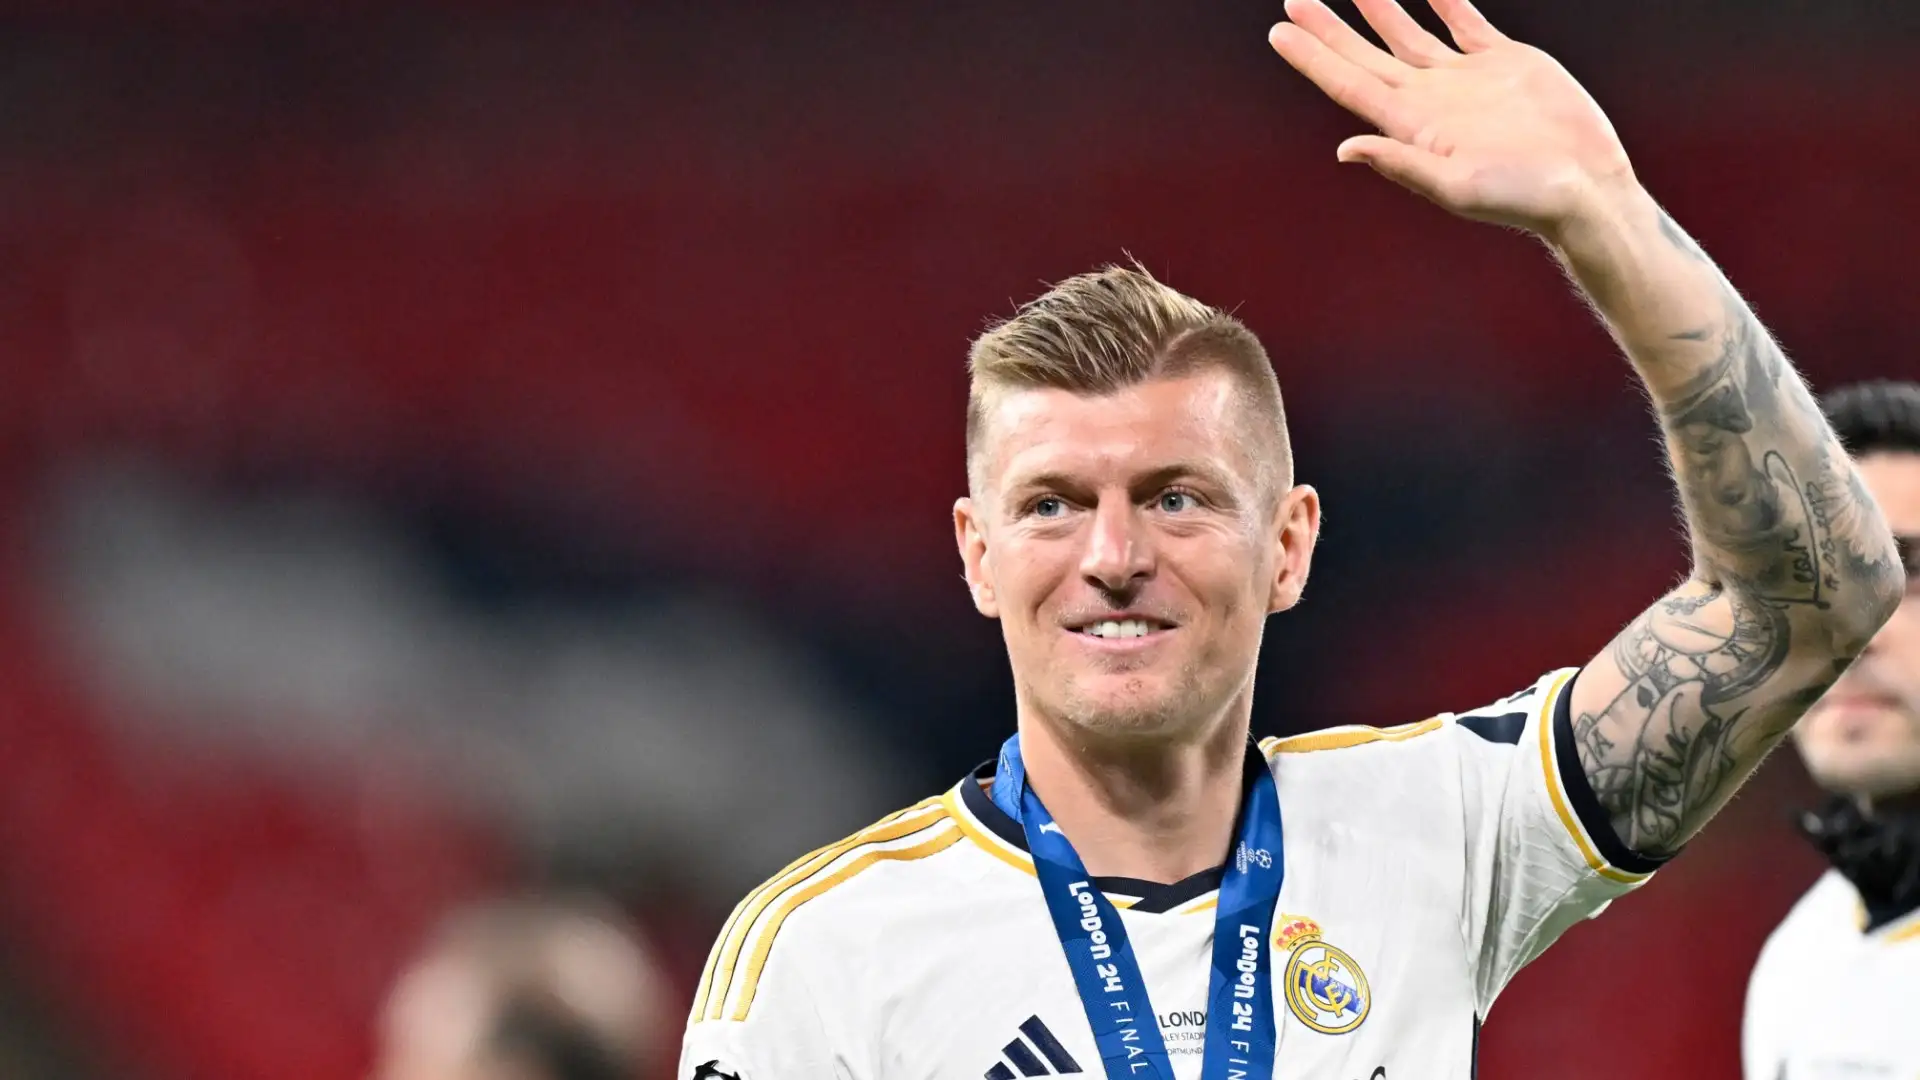 Toni Kroos reveals 'crucial factor' in Real Madrid's Champions League final victory over Borussia Dortmund as retiring legend signs off in perfect fashion